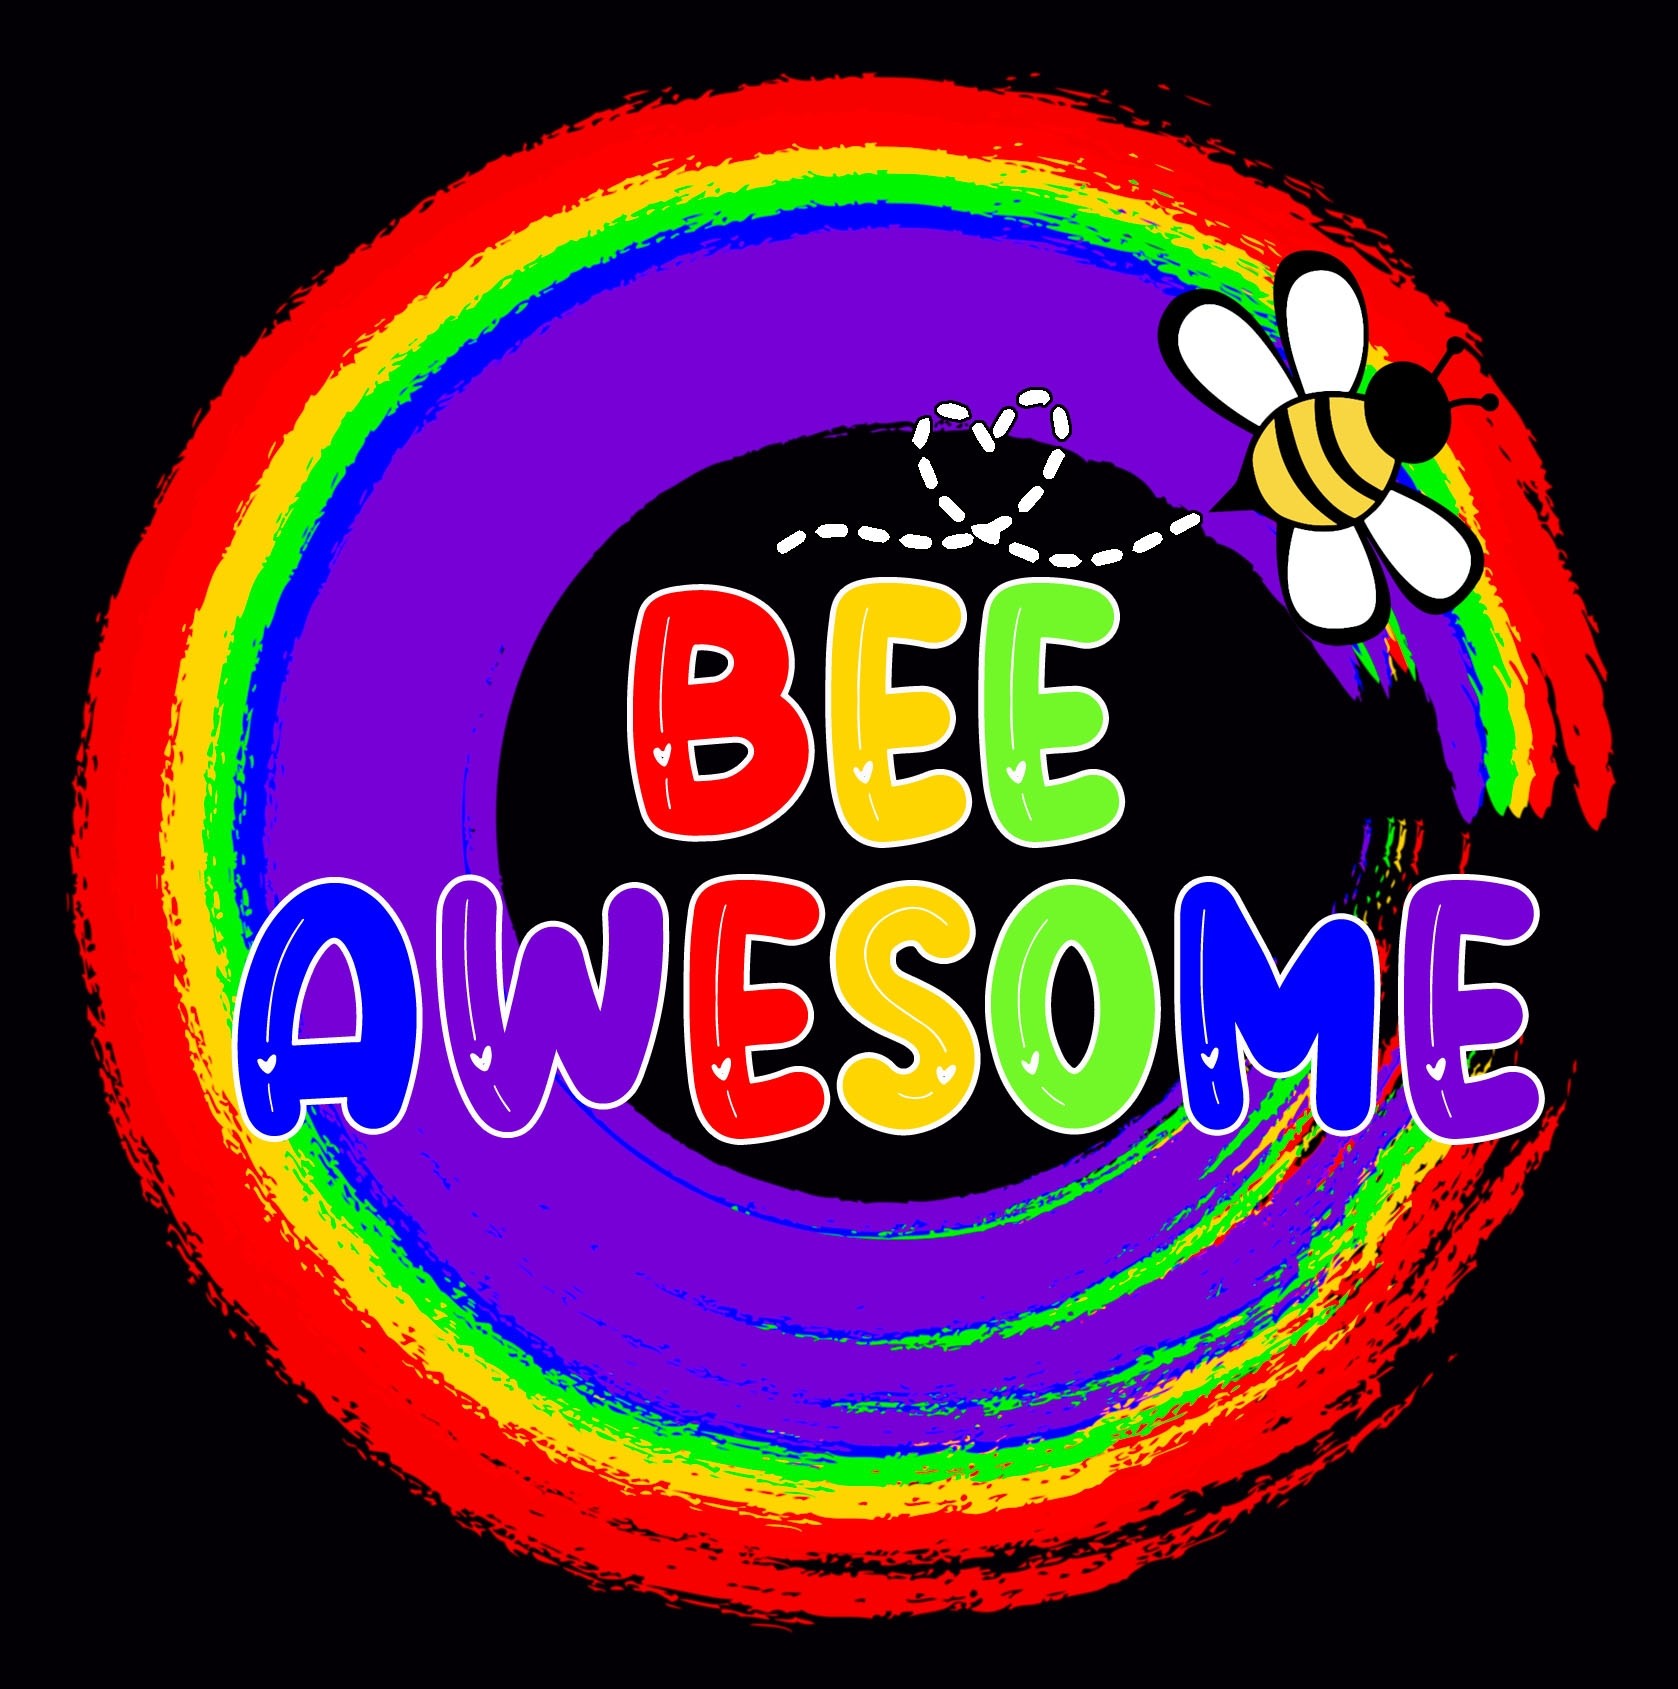 Inspirational Quote Pride Greeting Card - Bee Awesome